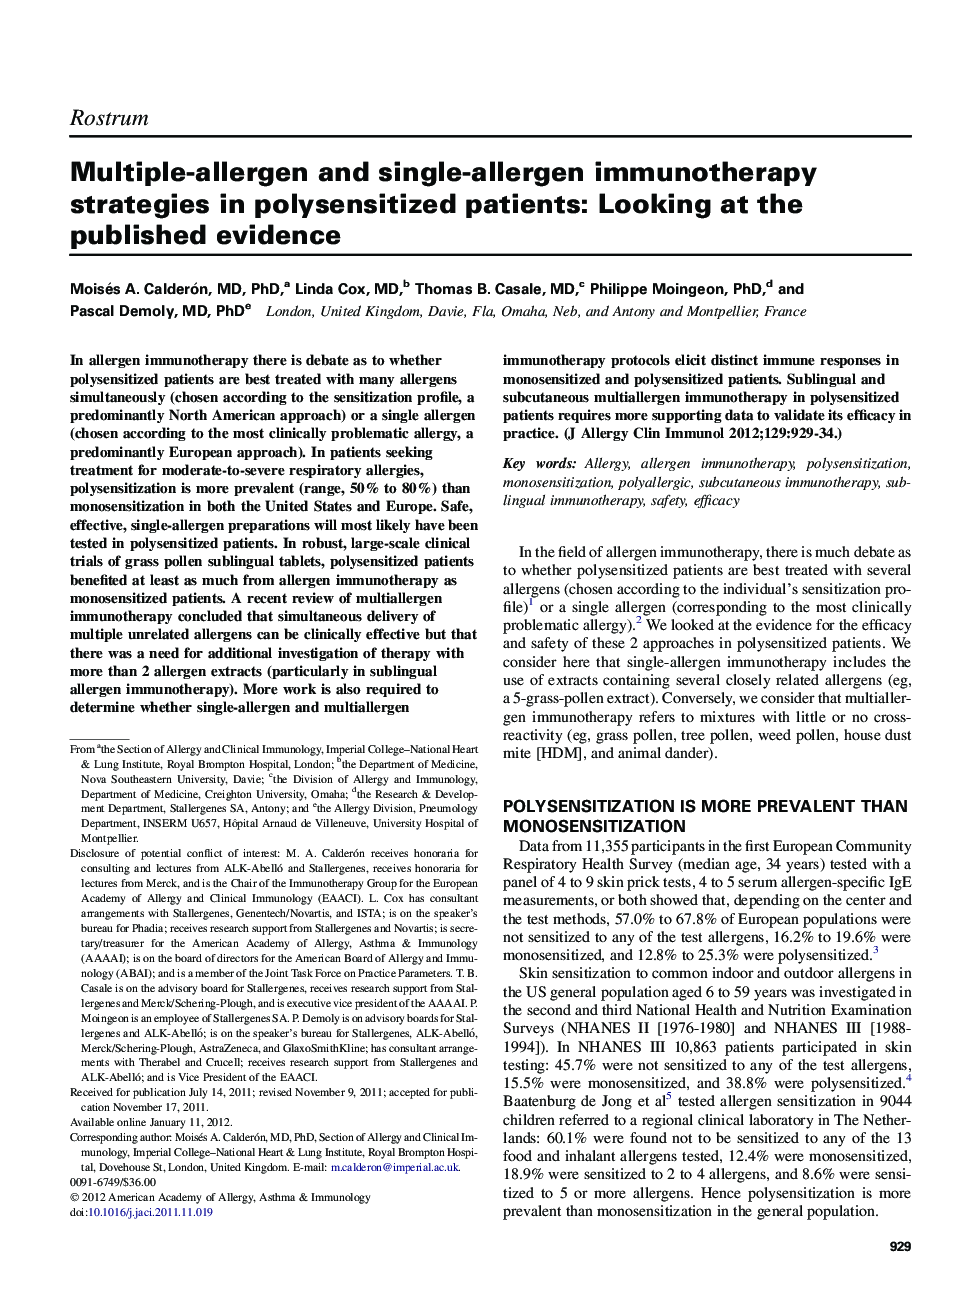 Multiple-allergen and single-allergen immunotherapy strategies in polysensitized patients: Looking at the published evidence